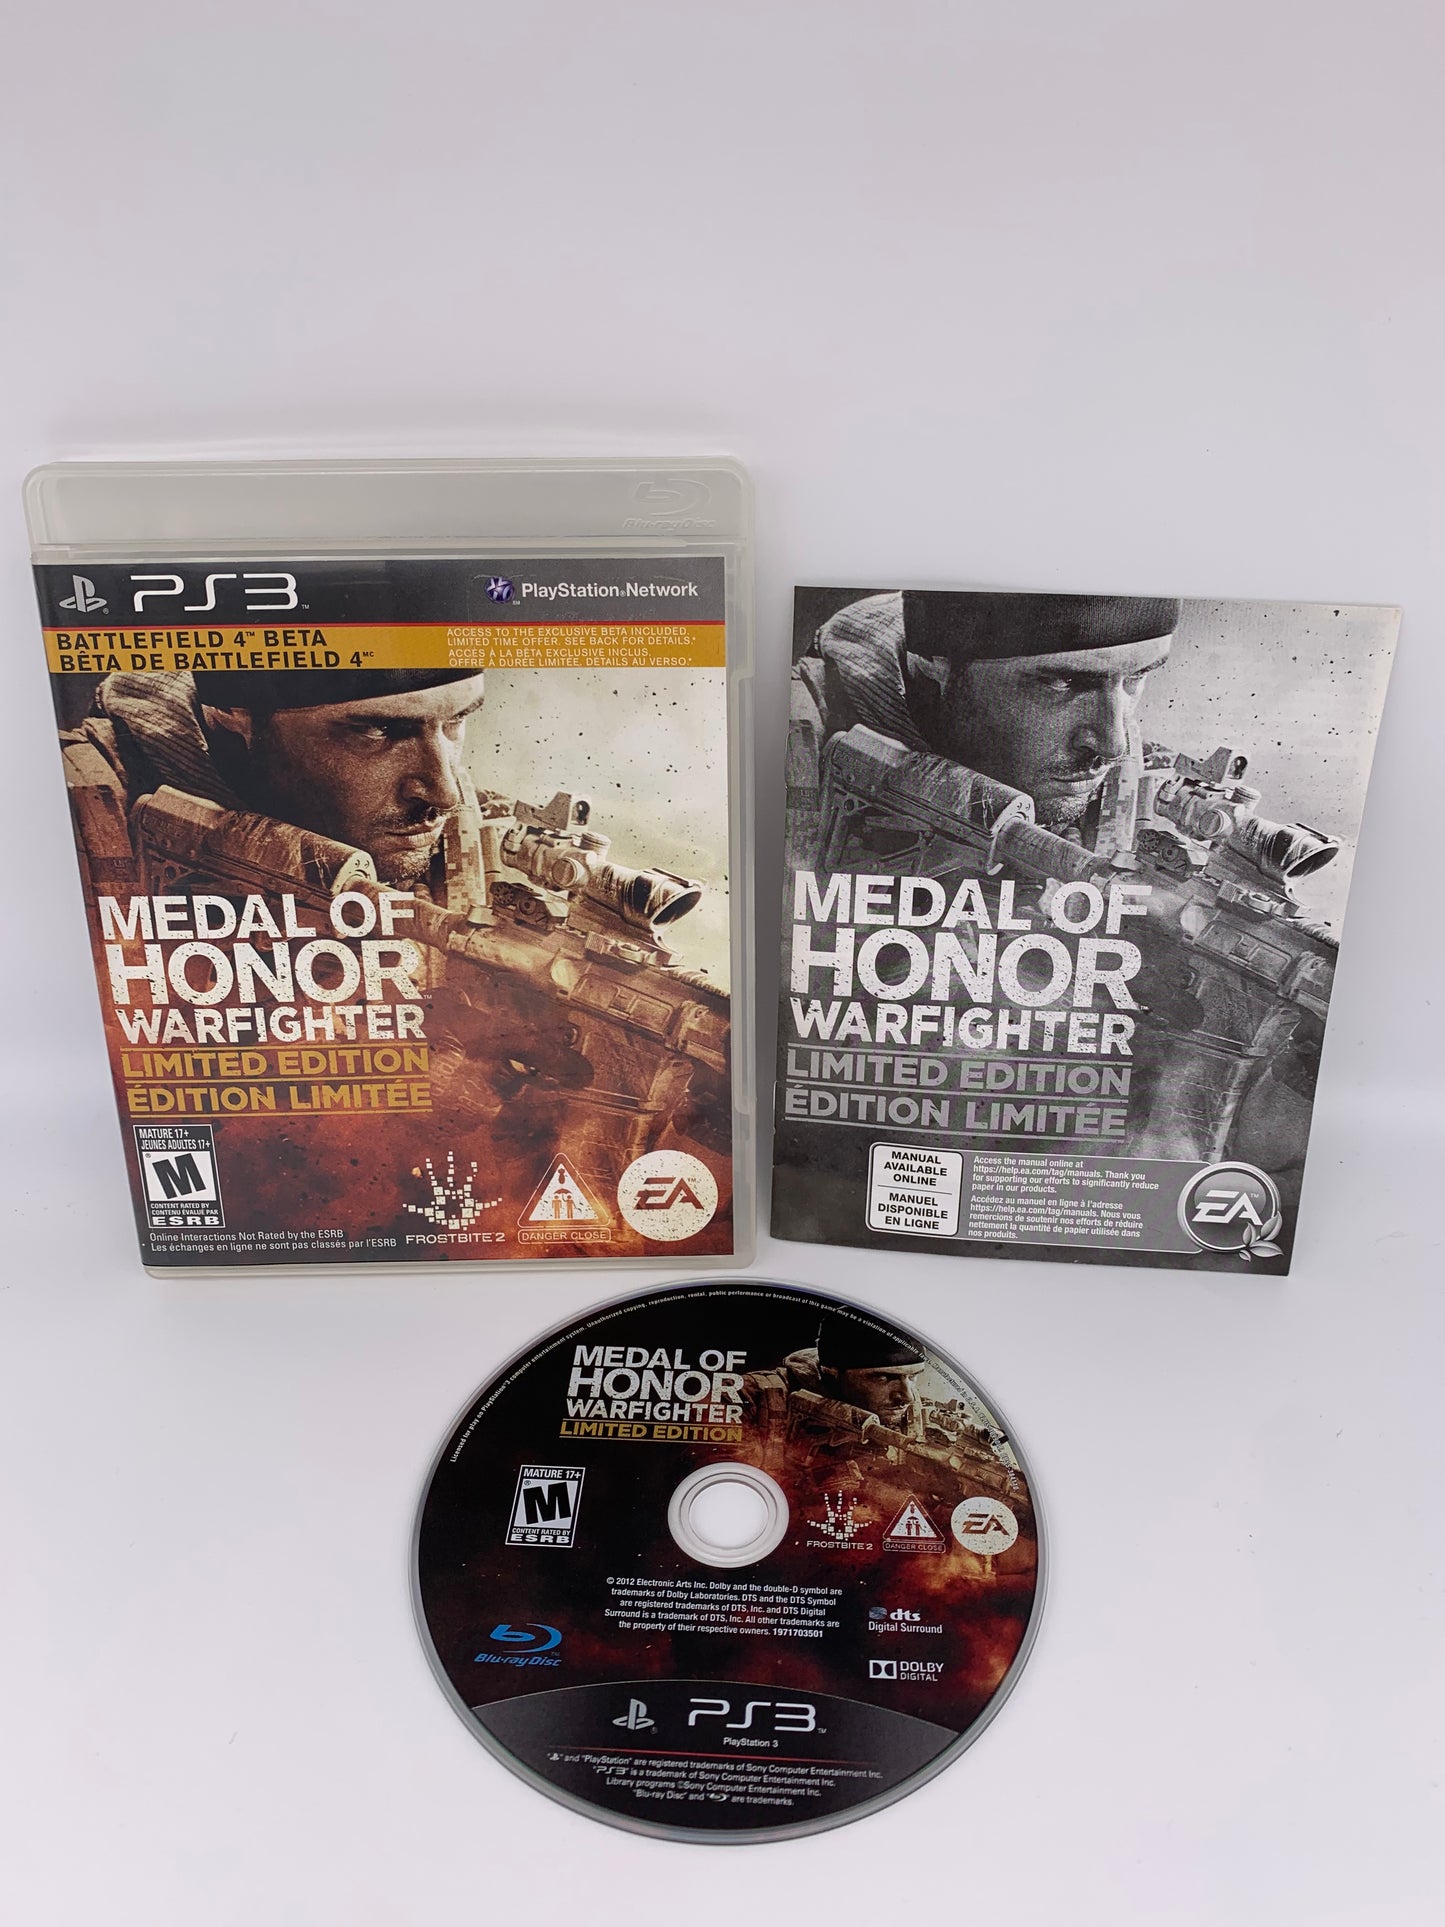 PiXEL-RETRO.COM : SONY PLAYSTATION 3 PS3 SONICS ULTIMATE GENESIS COLLECTION COMPLETE GAME BOX MANUAL NTSC MEDAL OF HONOR WARFIGHTER LIMITED EDITION